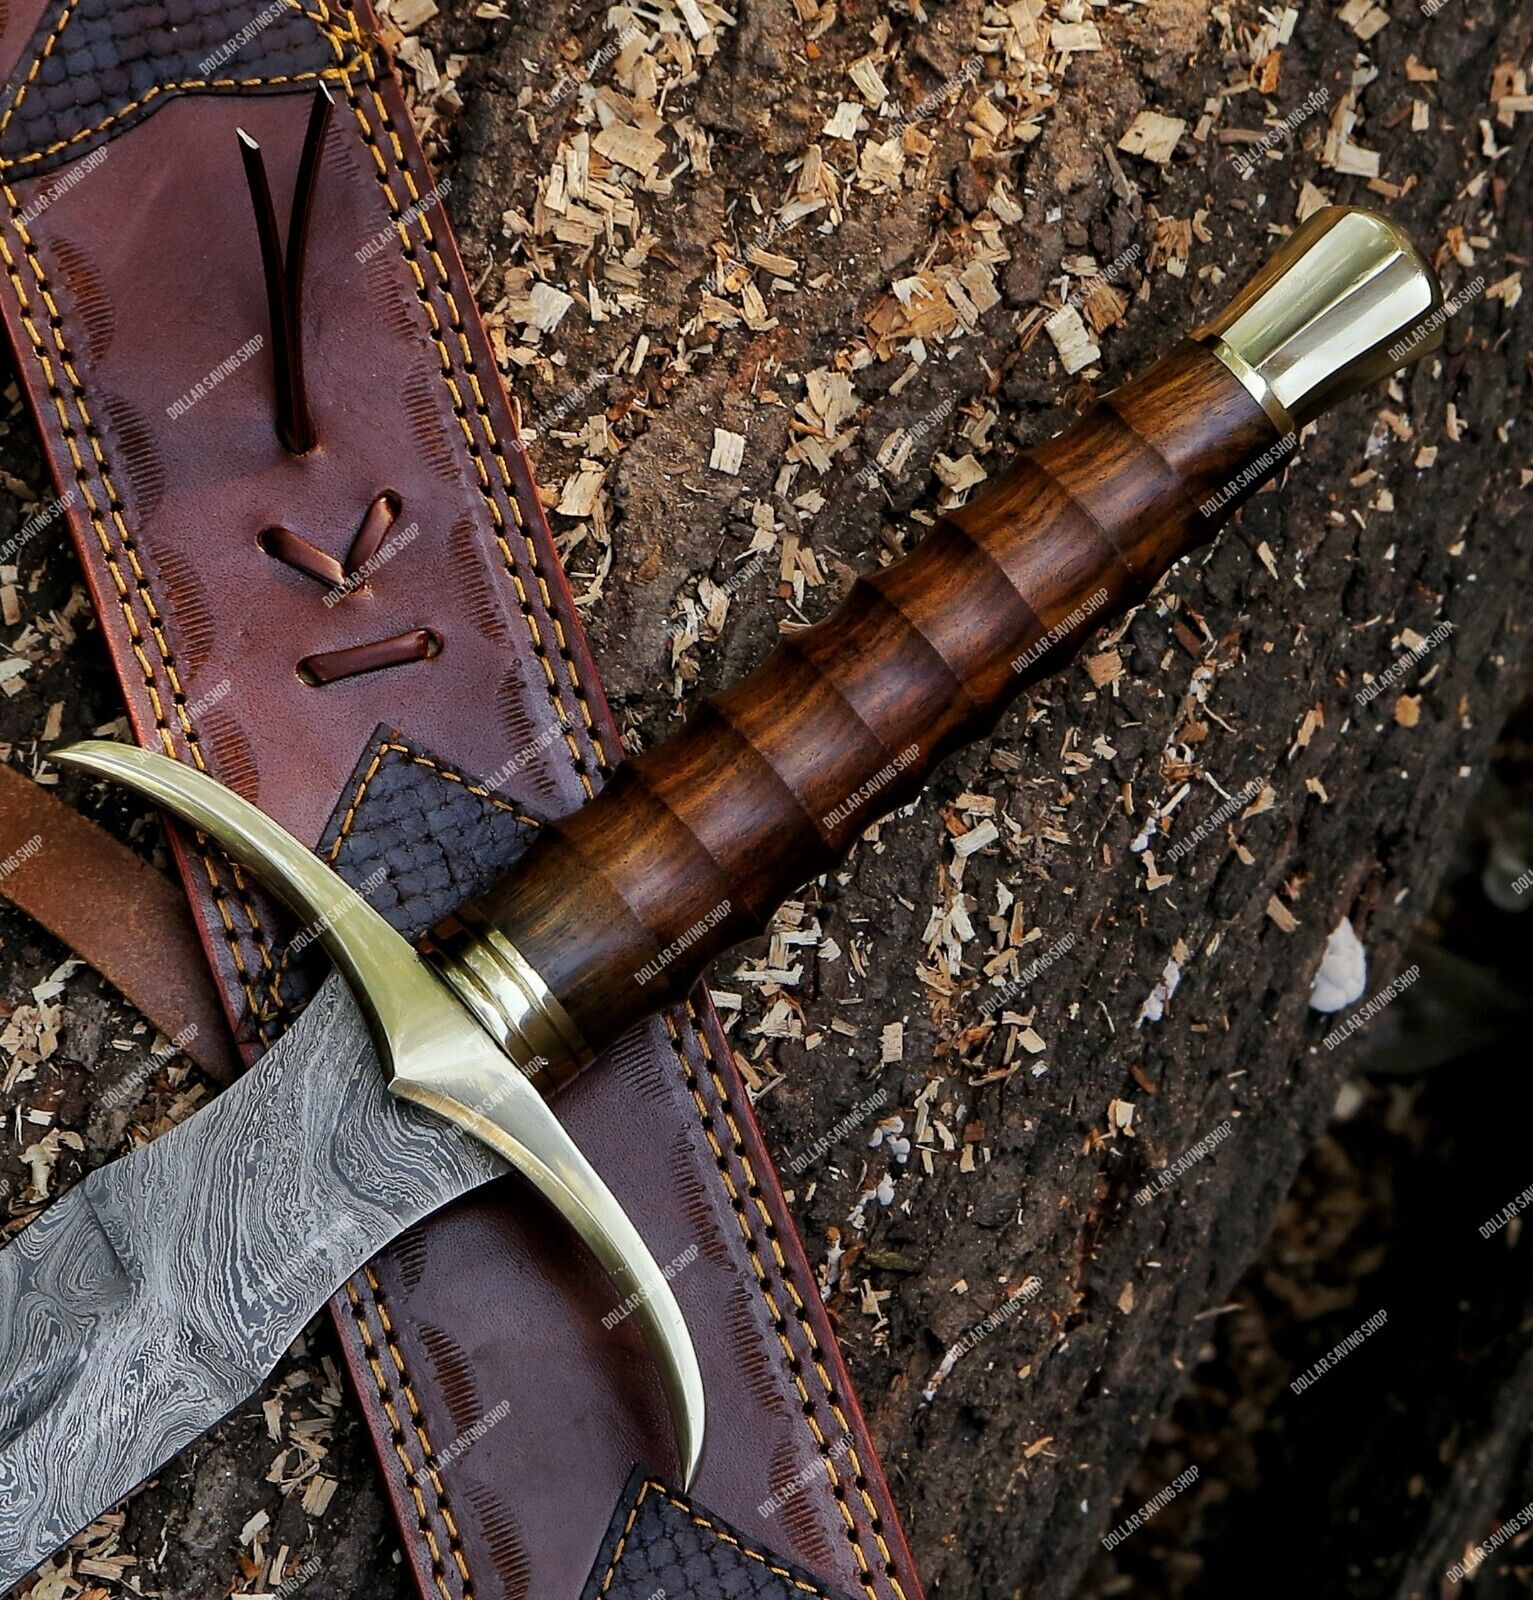 Eye-catching Handmade Damascus Steel Medieval / Viking Sword With Leather Sheath